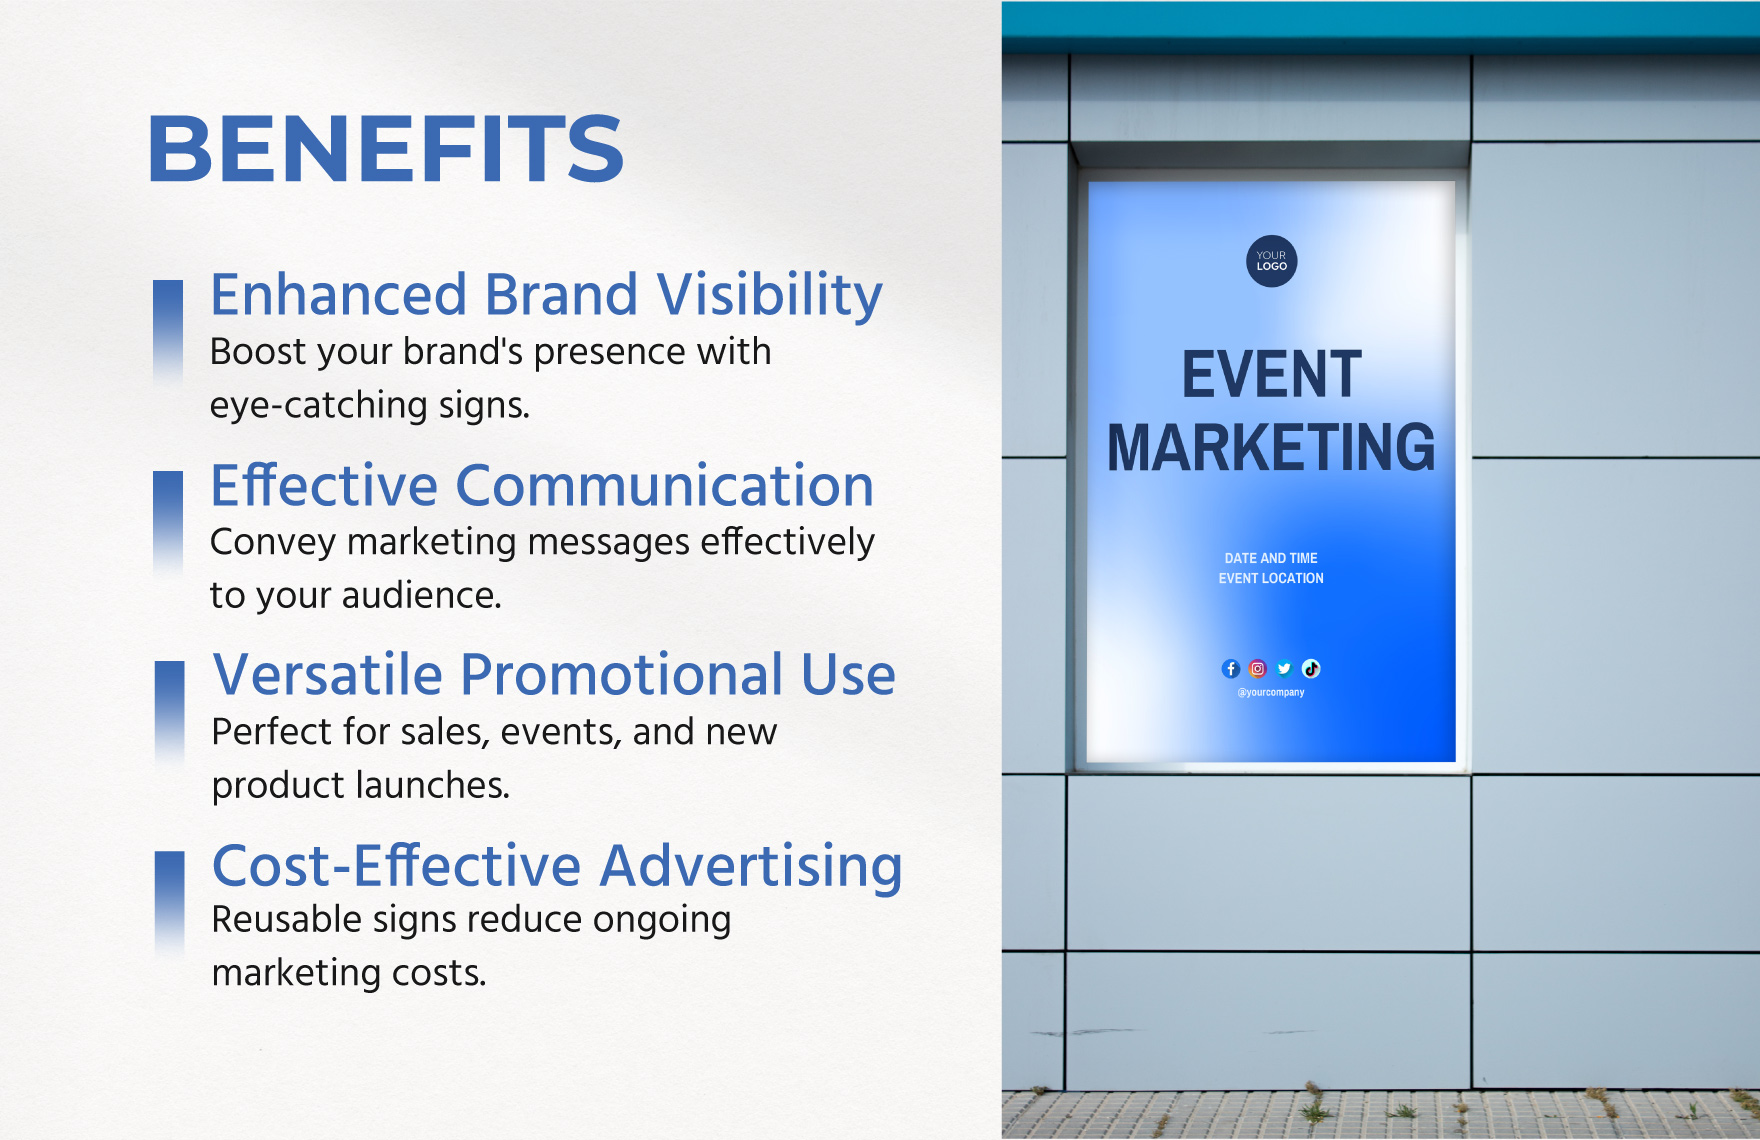 Event Marketing Sign Template